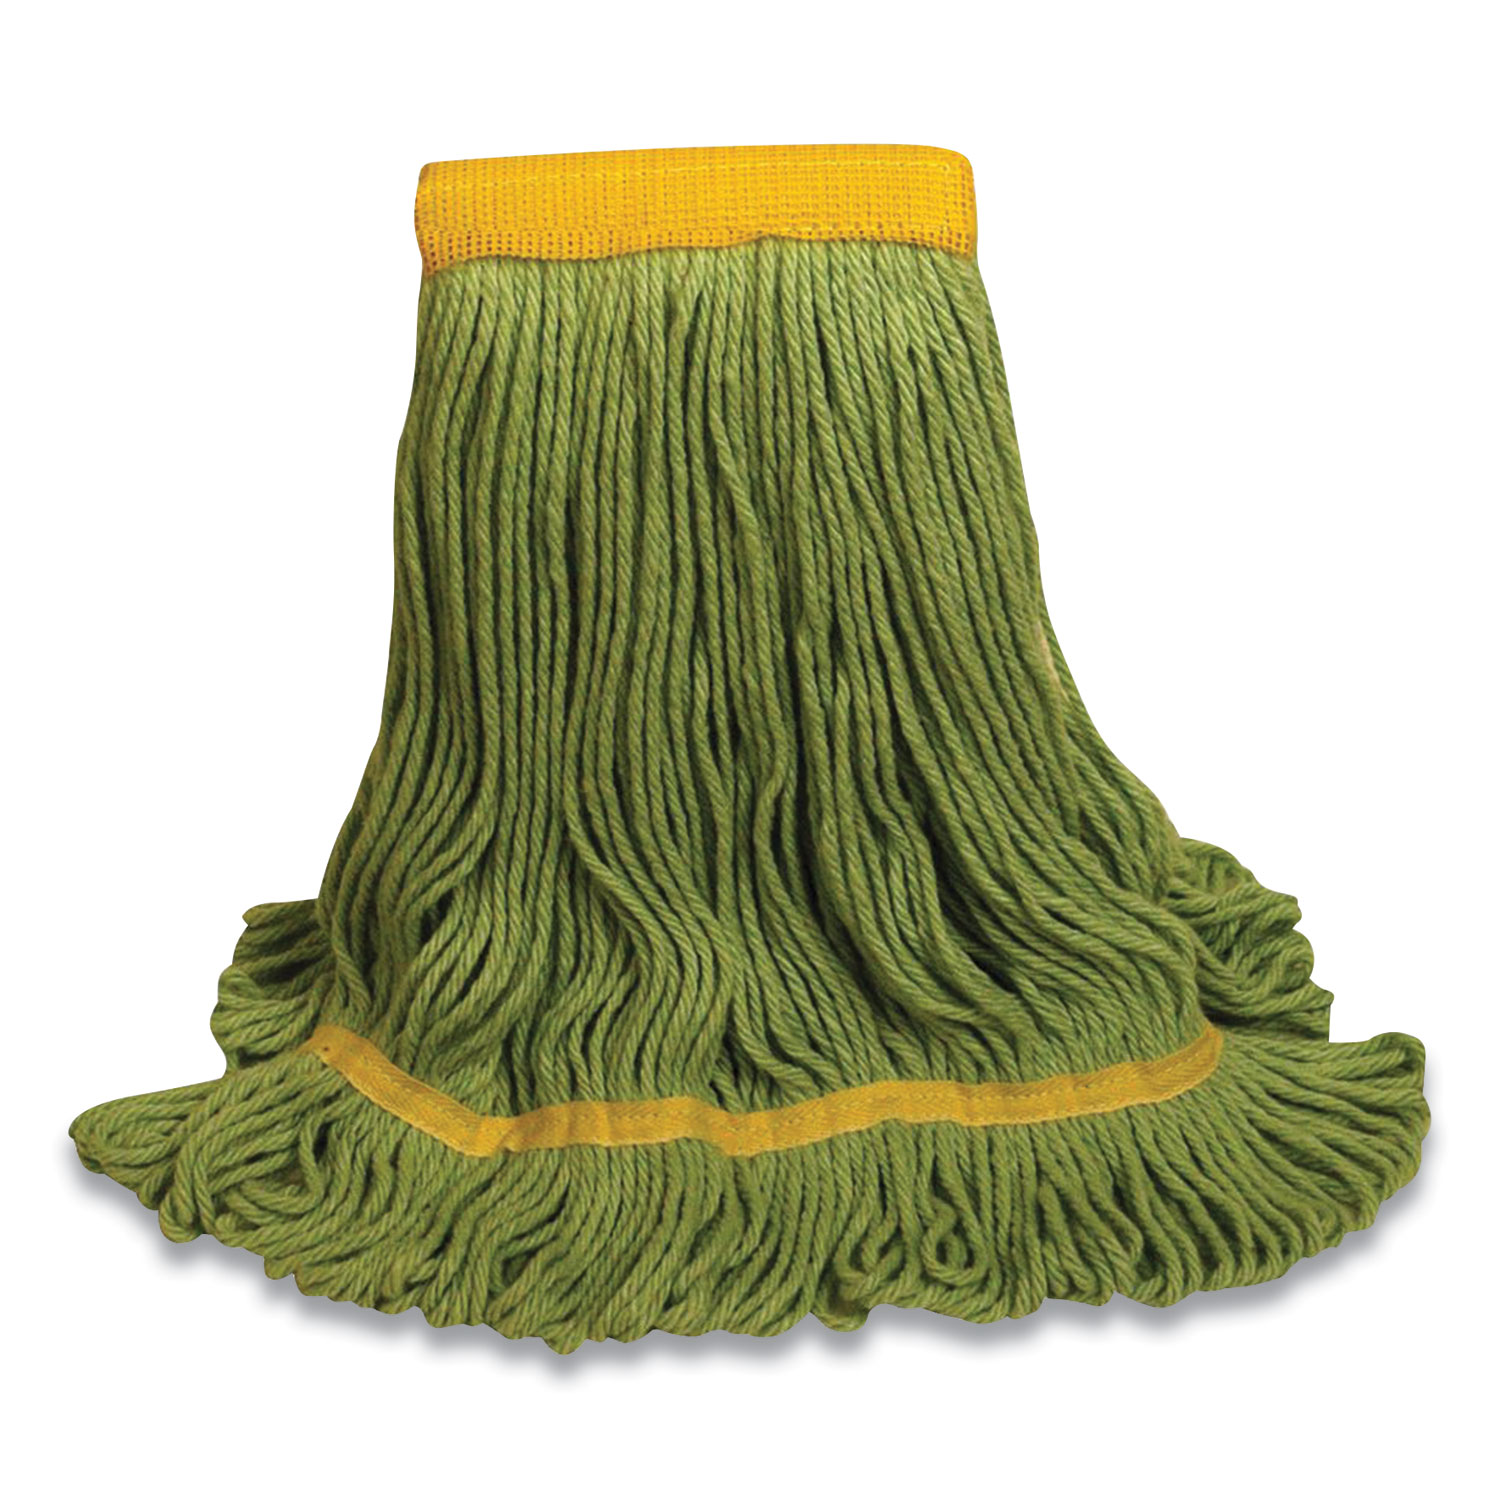 ODell® 1400 Series Mop Head, Cotton/Rayon/Synthetic Blend, Large, 5 Headband, Green